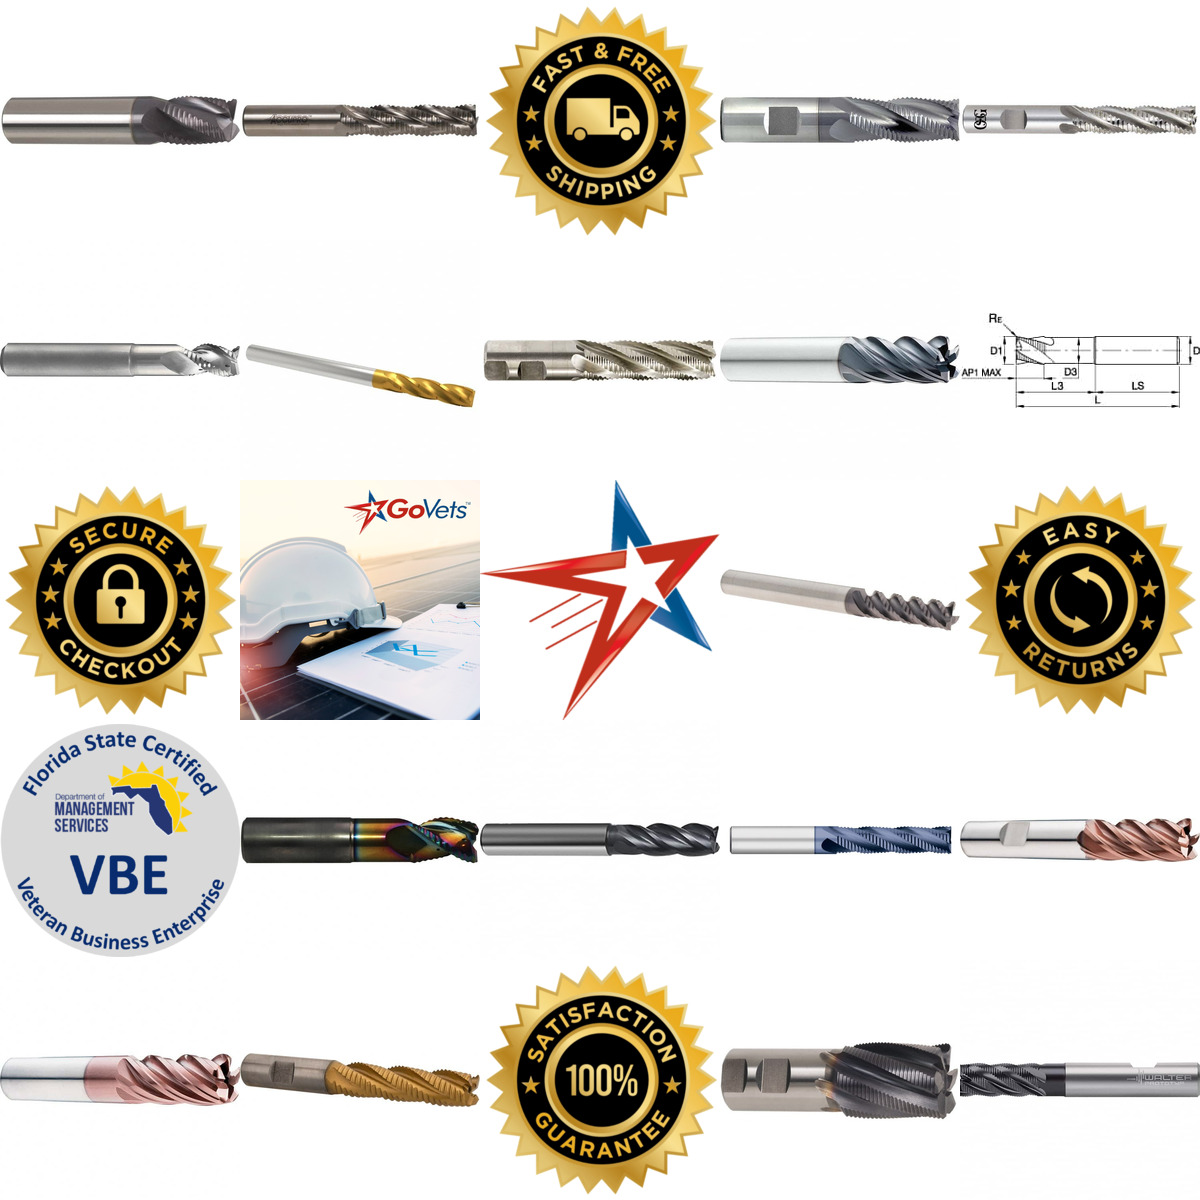 A selection of Roughing End Mills products on GoVets